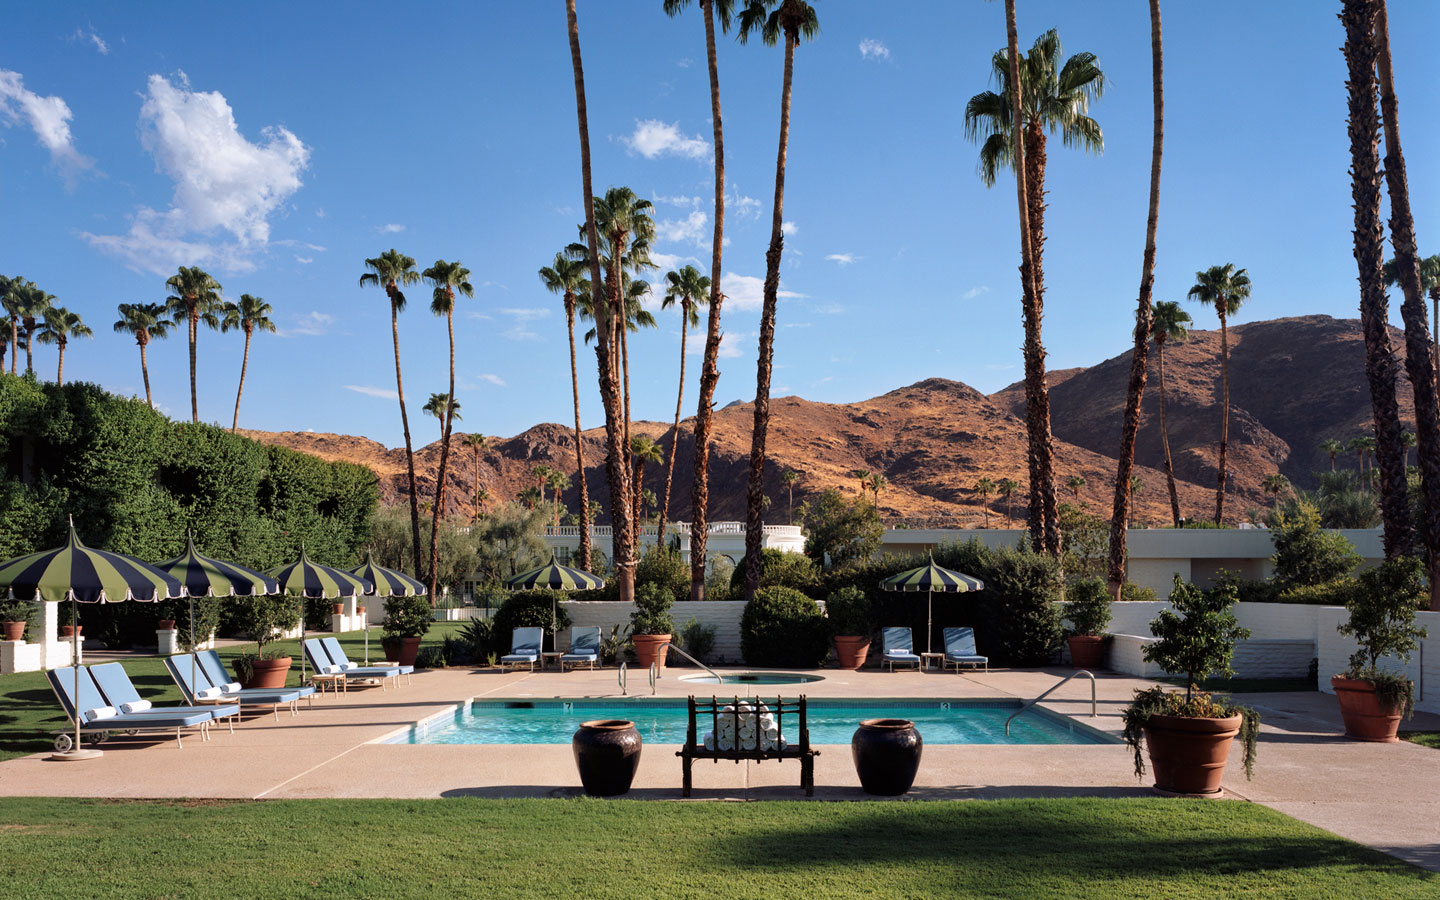 Luxury Palm Springs Hotels - The Parker Palm Springs